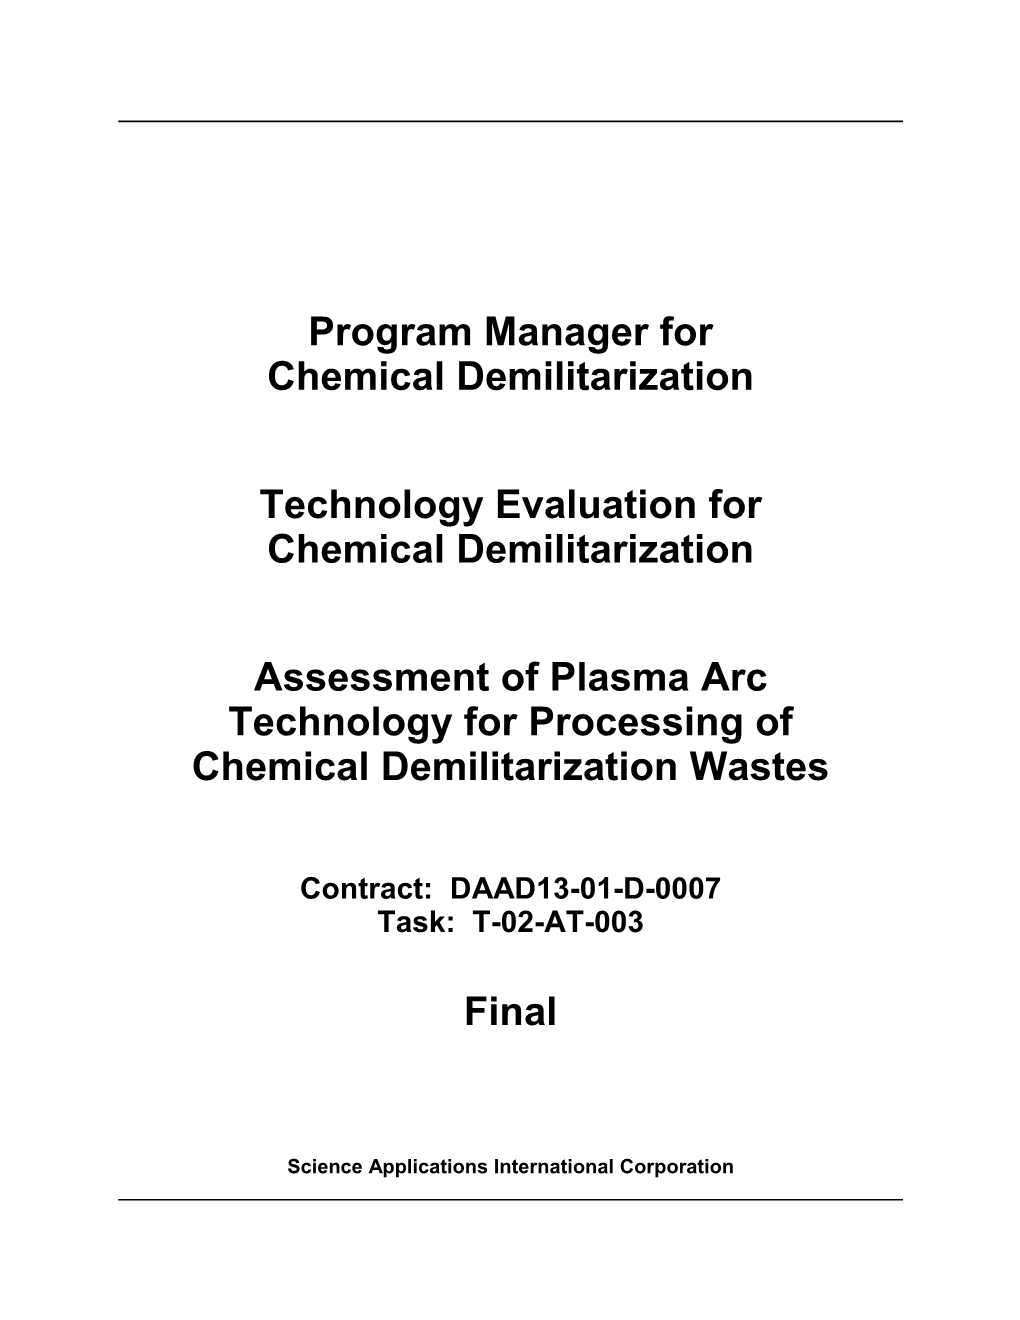 Assessment of Plasma Arc Technology for Processing of Chemical Demilitarization Wastes